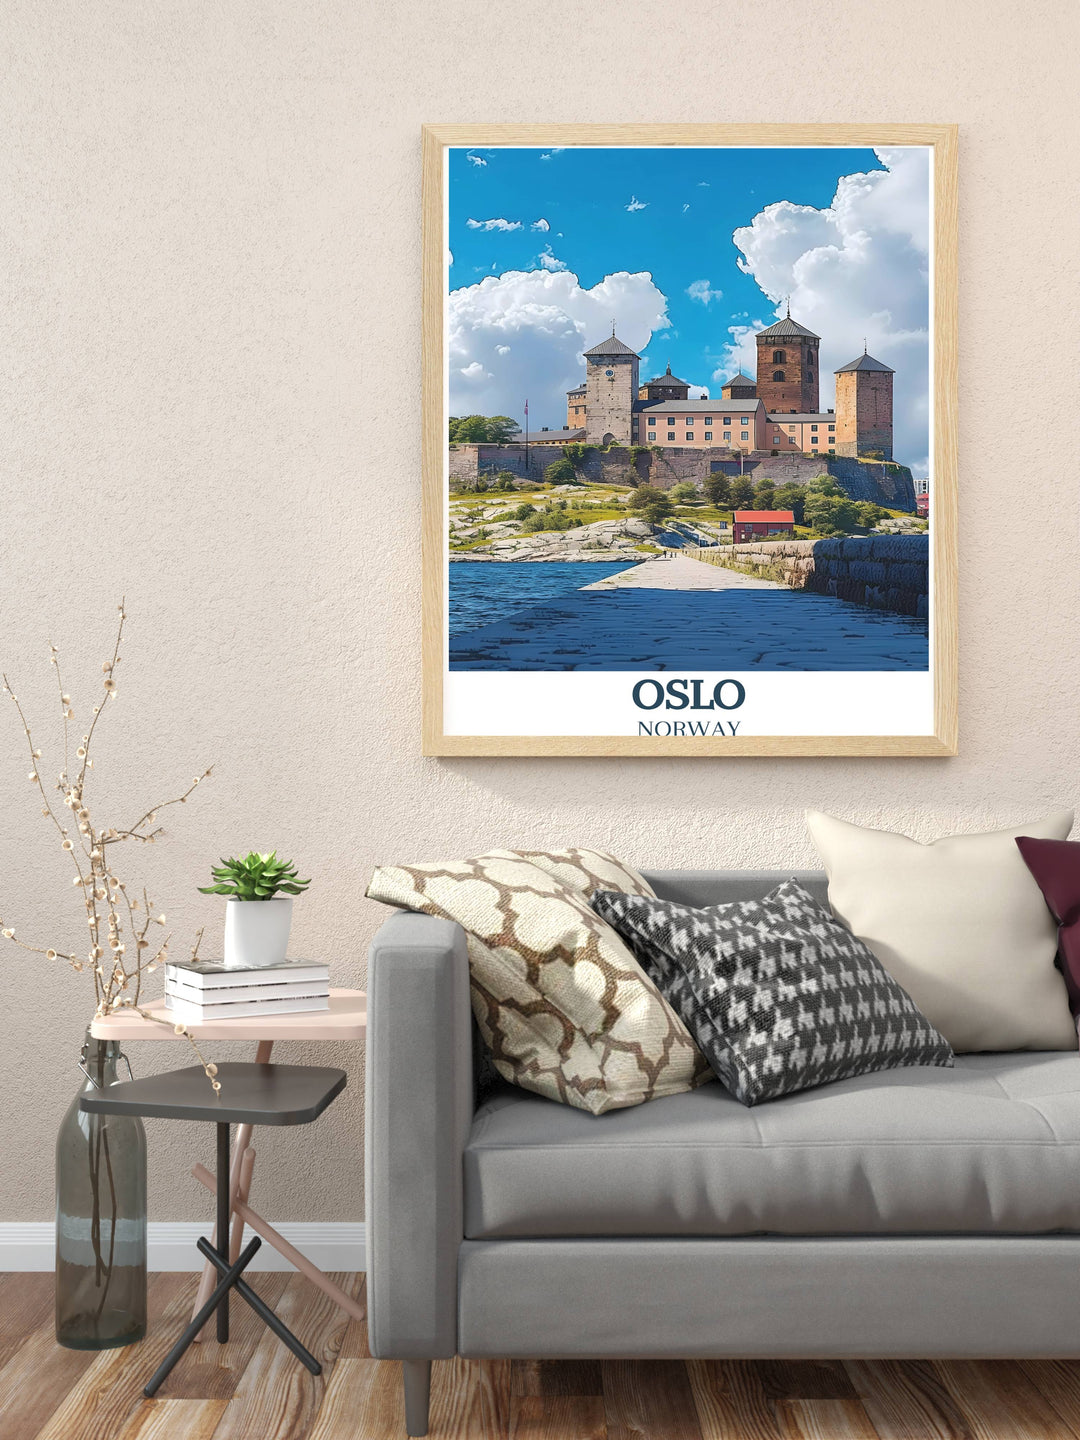 Retro travel poster of Oslo, featuring vintage inspired design elements and iconic landmarks like Akershus Fortress.